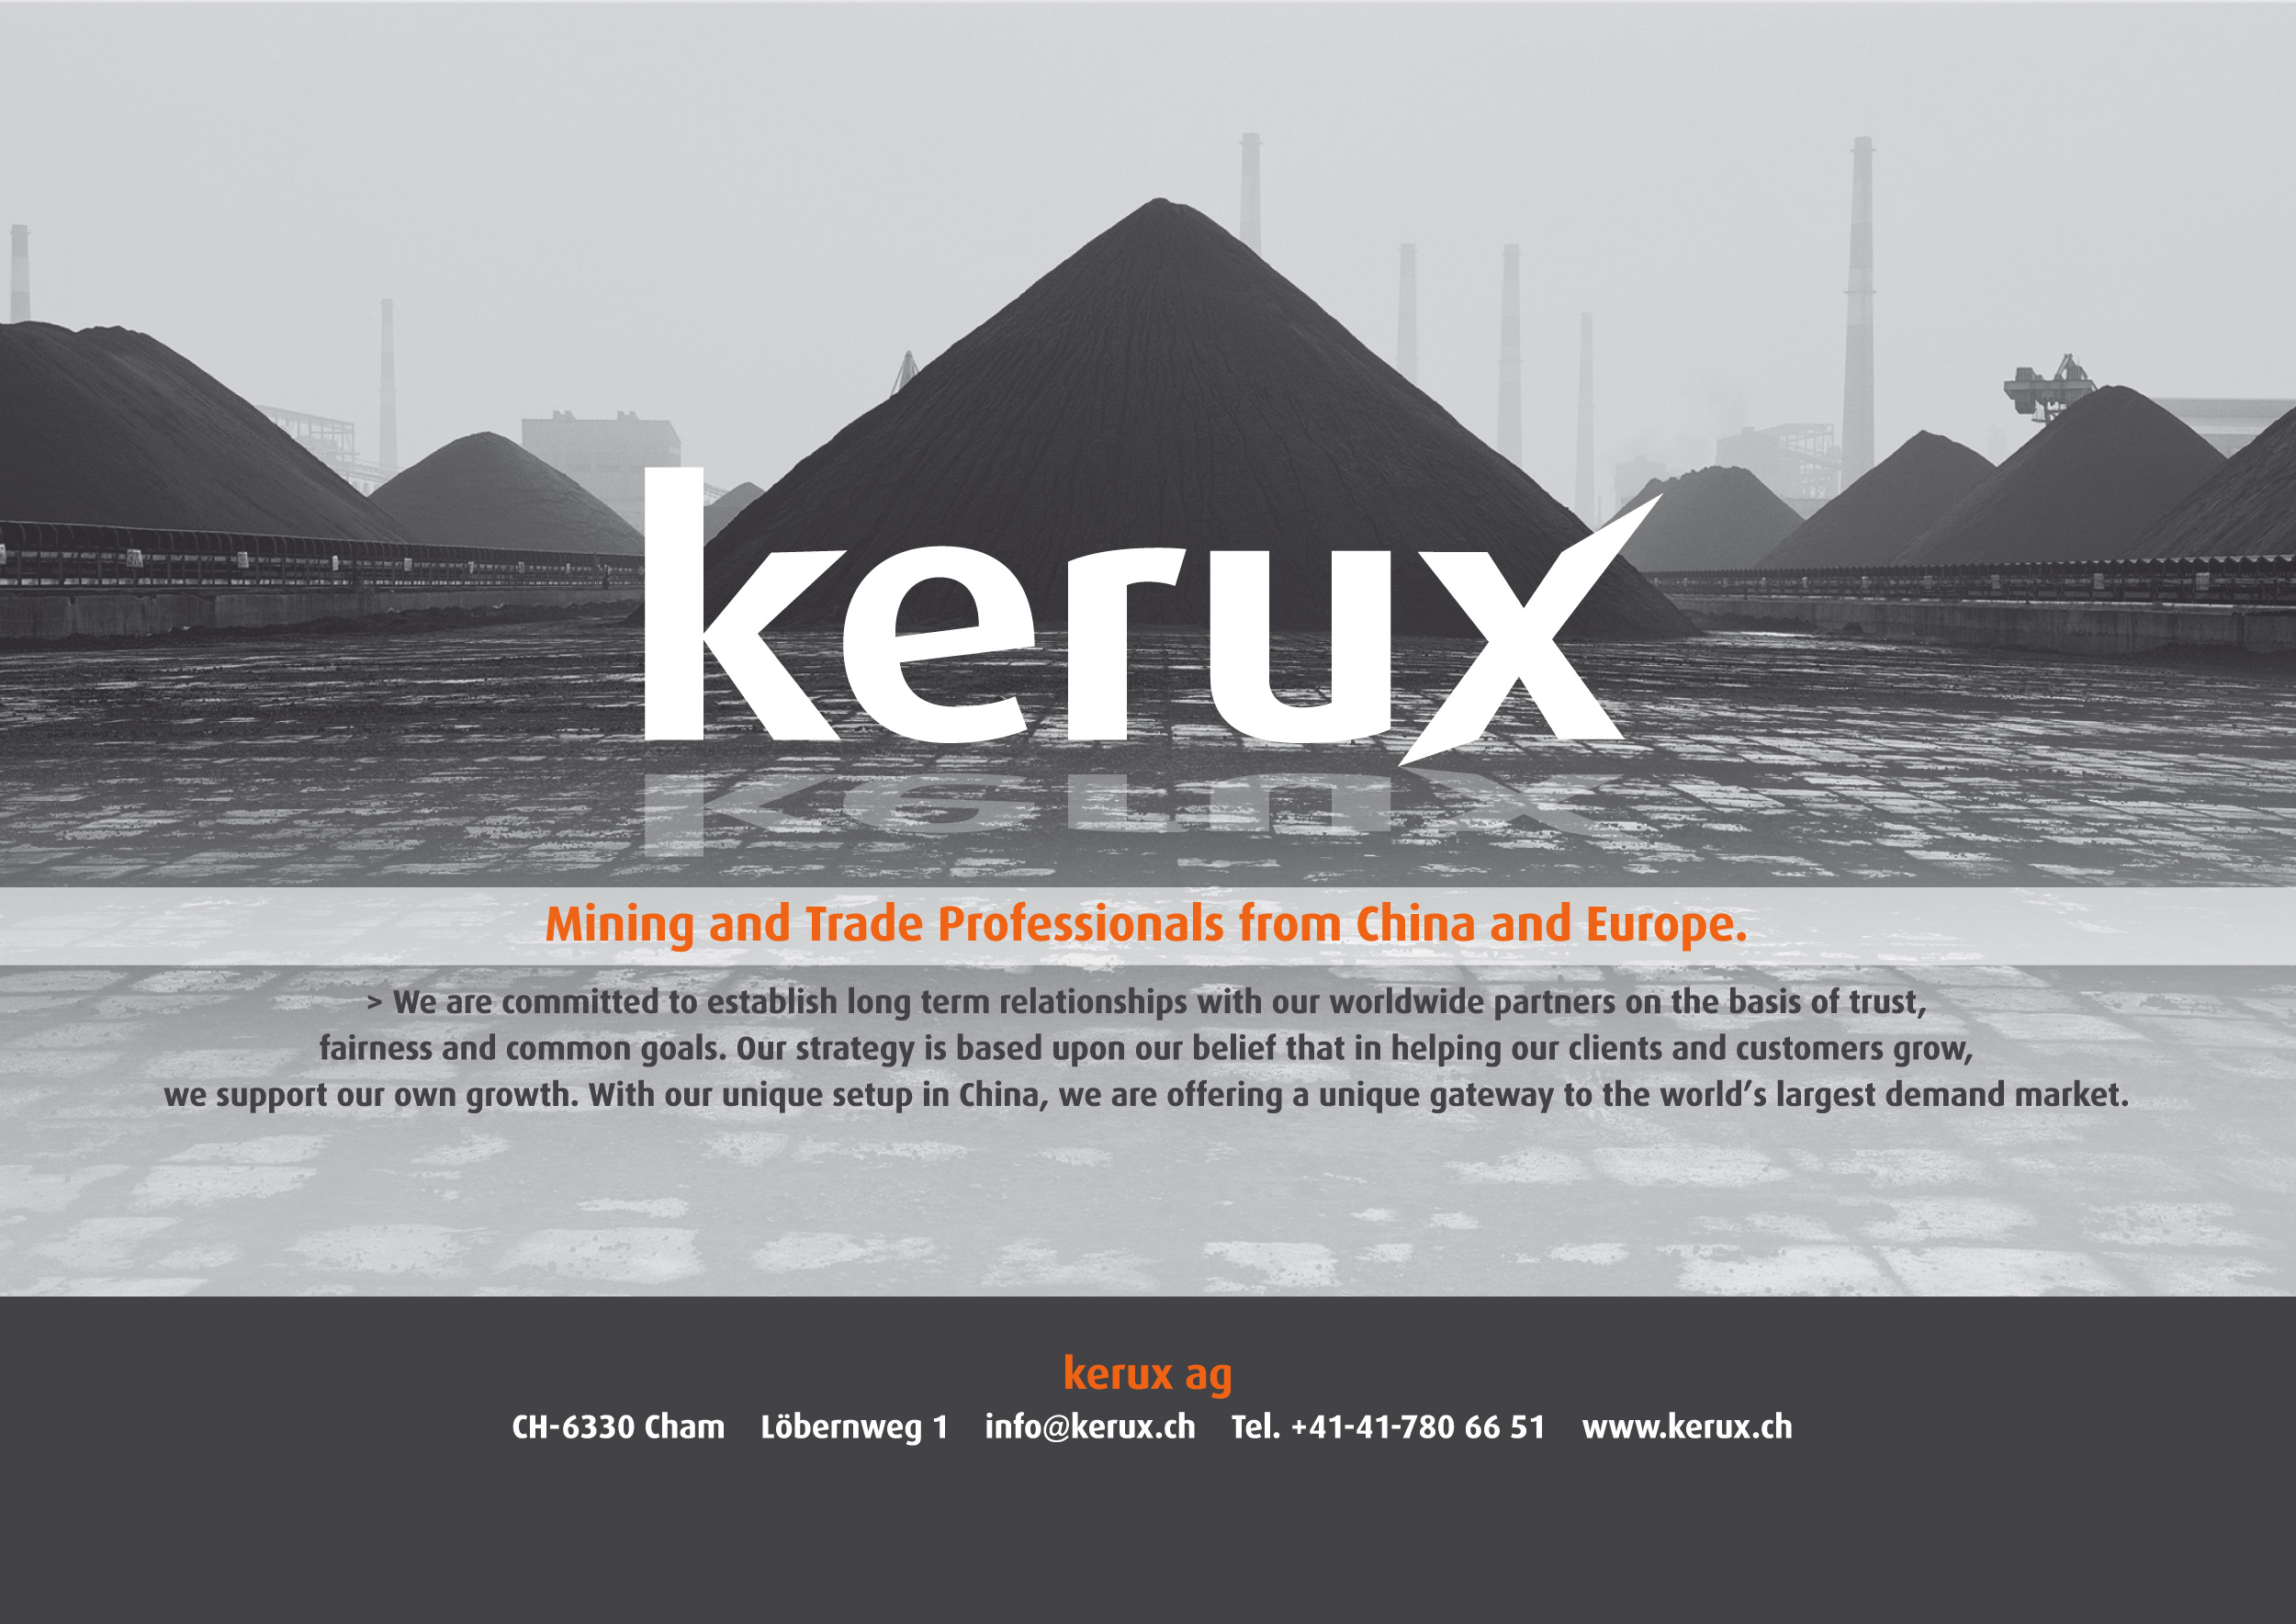 kerux - Mining and Trade Professionals from China and Europe